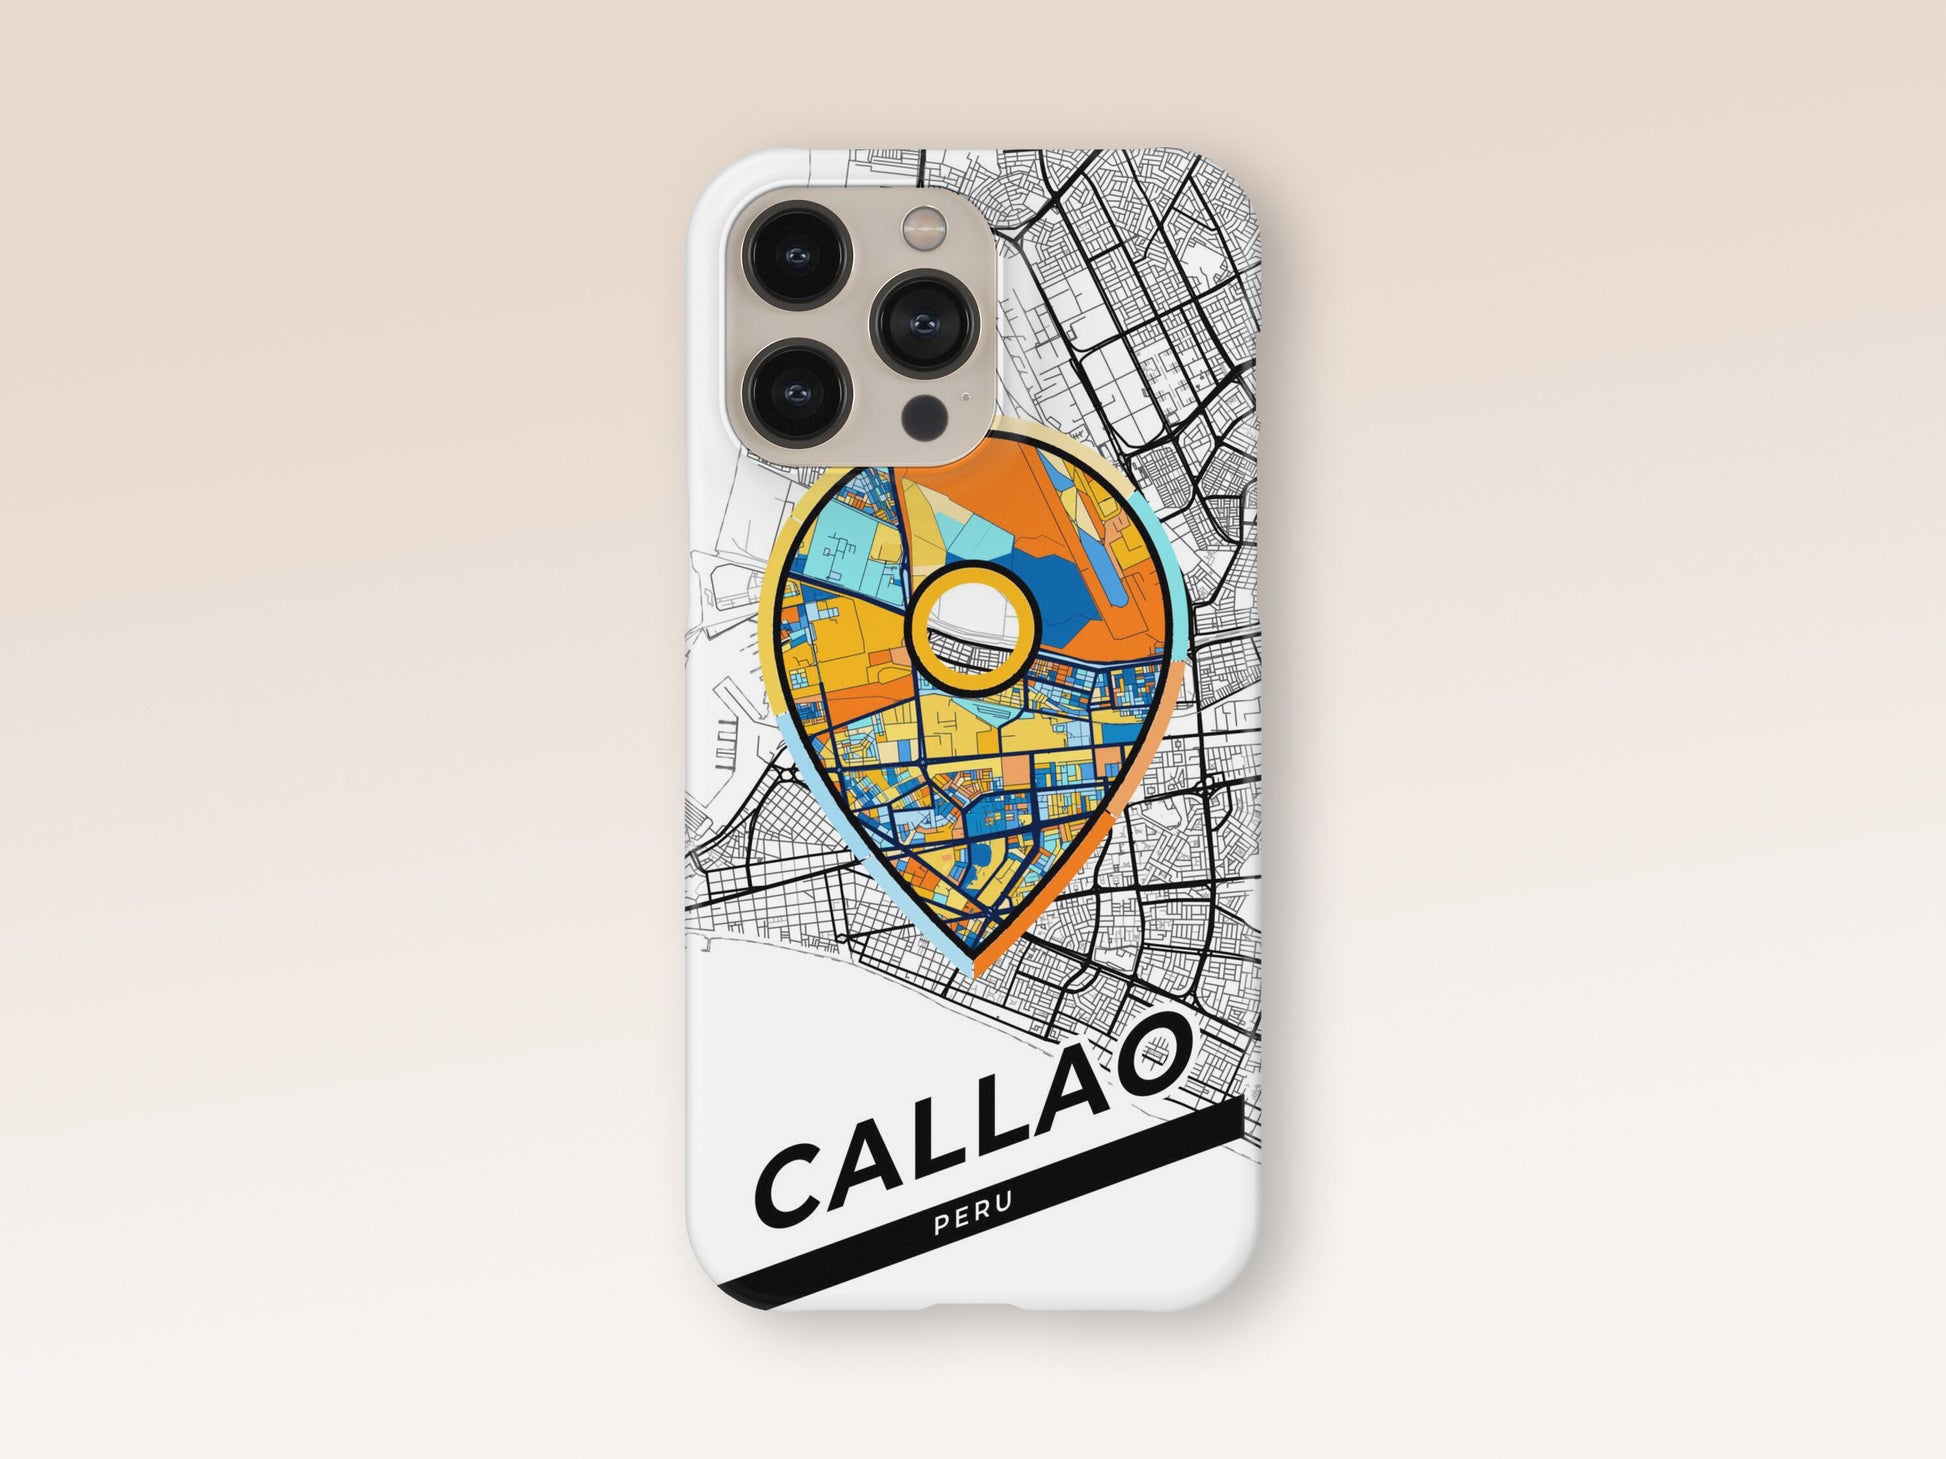 Callao Peru slim phone case with colorful icon. Birthday, wedding or housewarming gift. Couple match cases. 1